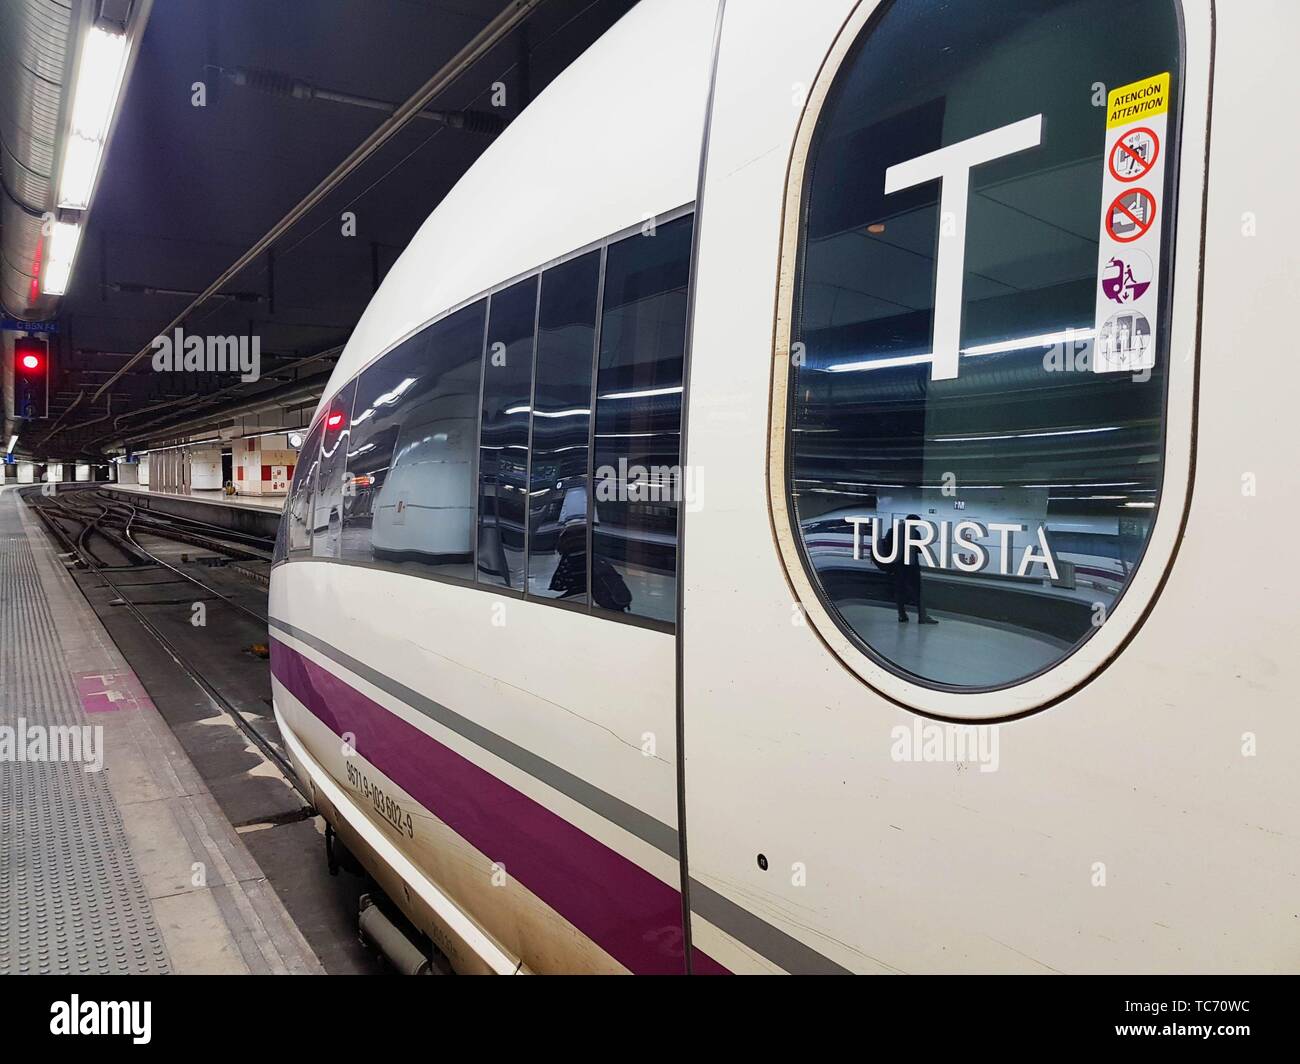 Spain. Europe. RENFE High Speed †‹†‹Train Series 103. On January 30, 2007 was presented the first high-speed train of the 103 series. This series, Stock Photo